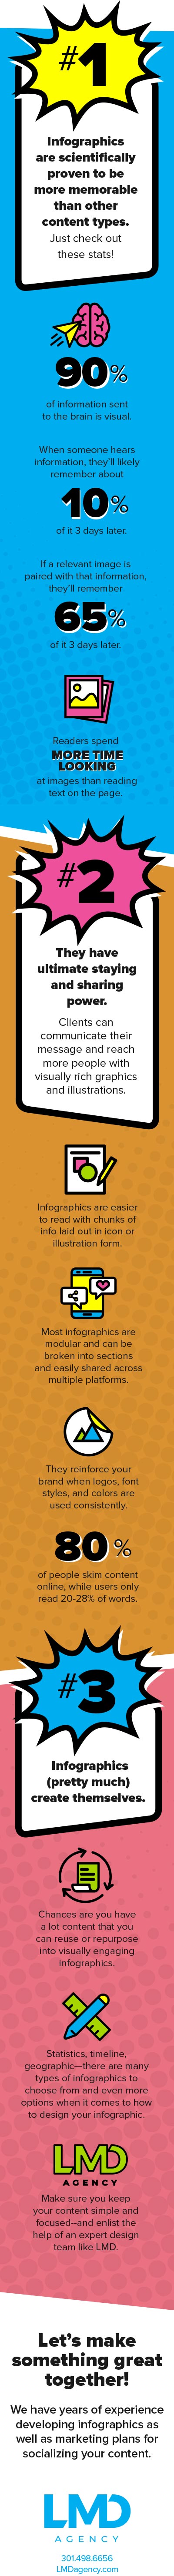 The Secret Powers of Infographics: The benefit of sharing information and data through eye-catching visual storytelling is a fun and refreshing departure from ho-hum narrative content--plus, infographics can be incredibly valuable when it comes to helping your content stick with audiences. Indeed, infographics have many super powers--here are just a few.